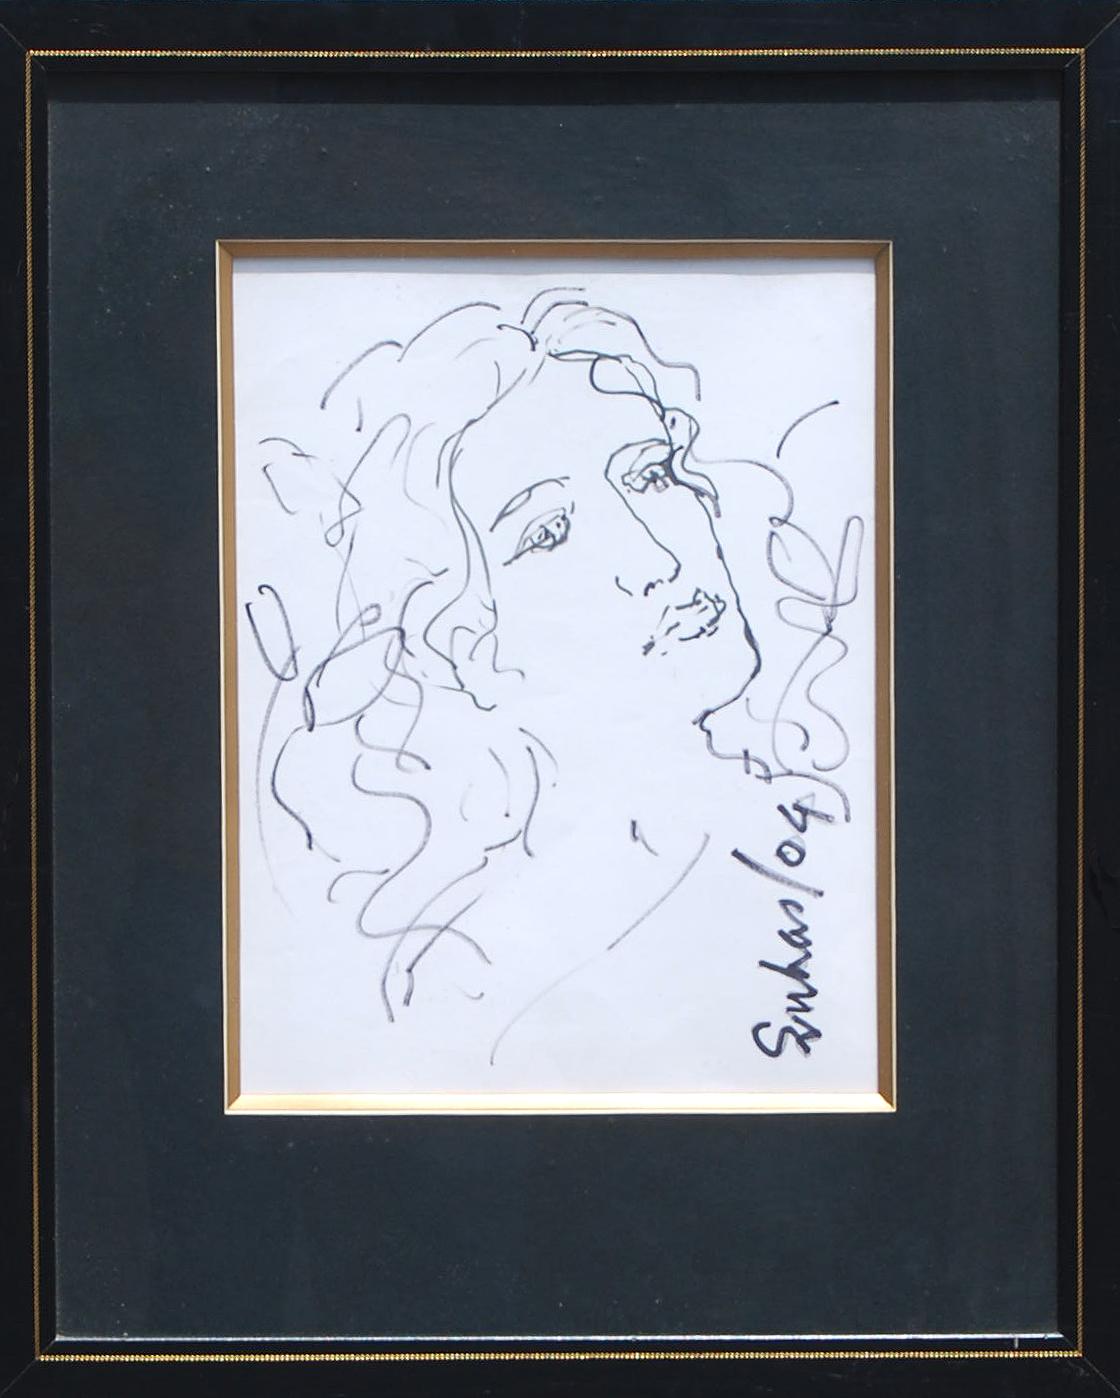 Suhas Roy Figurative Art - Radha, Ethereal, Mystic Godlike, Innocent Spirit, Ink on paper "In Stock"